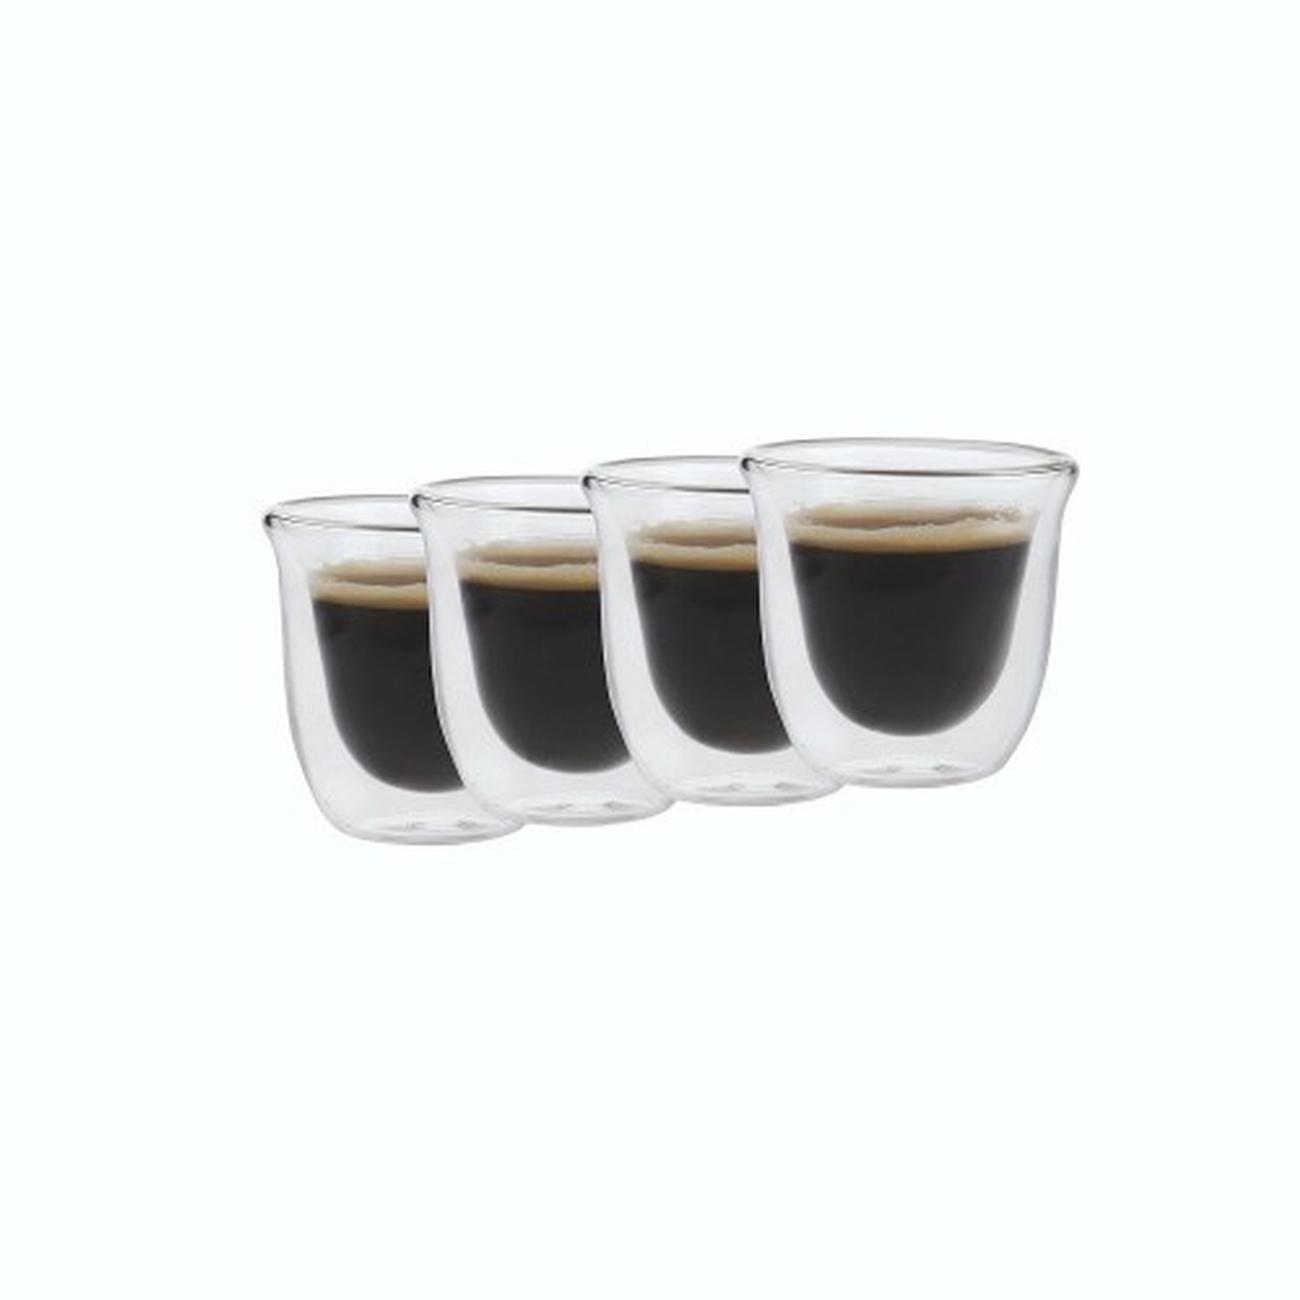 https://www.thekitchenwhisk.ie/contentfiles/productImages/Large/La-Cafetiere-Double-Walled-Espresso-Glasses-4pc.jpg